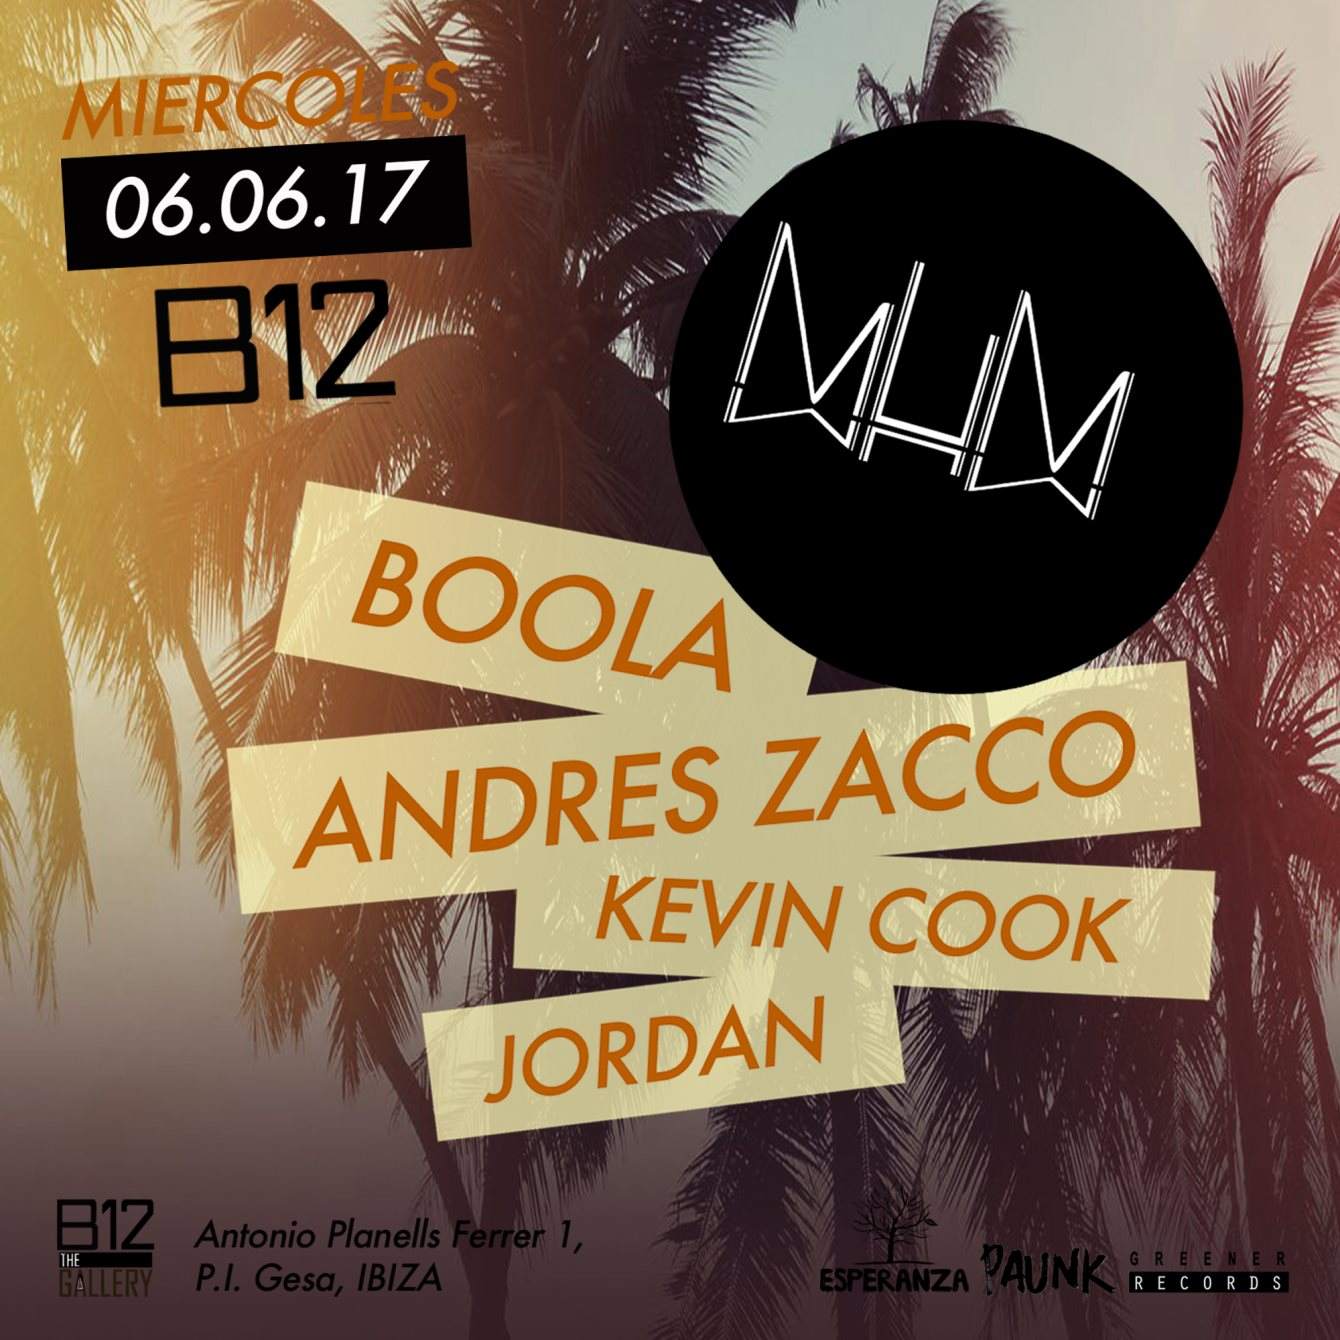 MuM Special Night with Boola, Andres Zacco, Kevin Cook & Jordan - フライヤー表